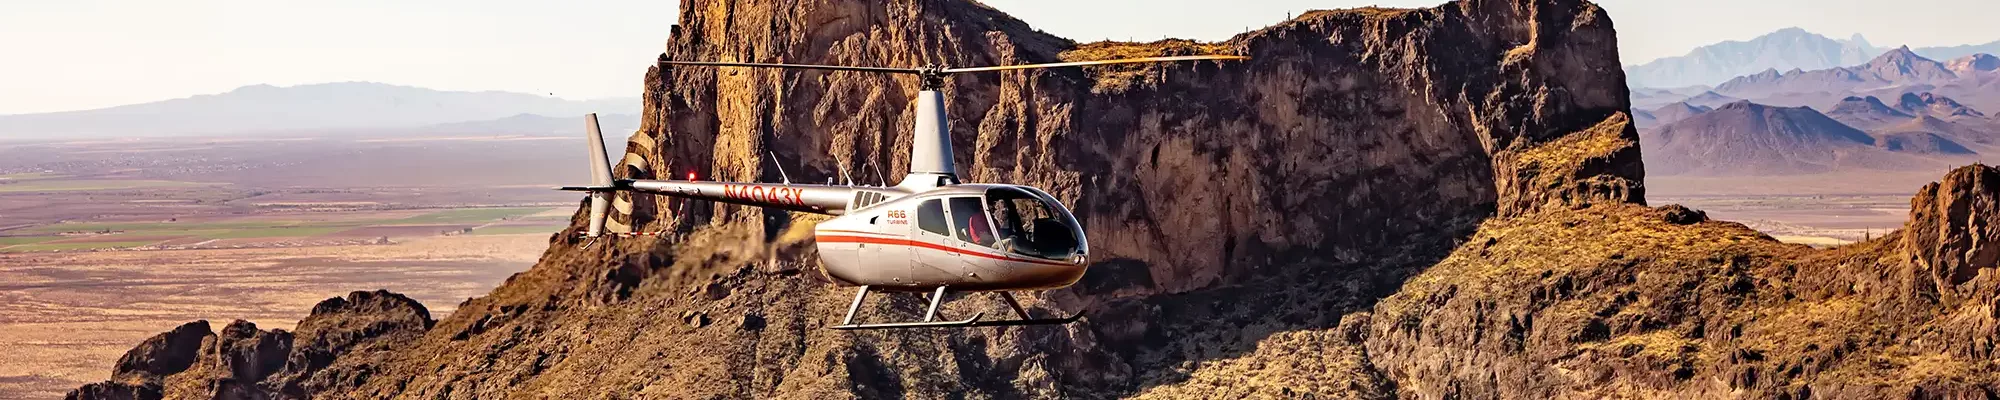 Quantum Helicopters R44 helicopter flying